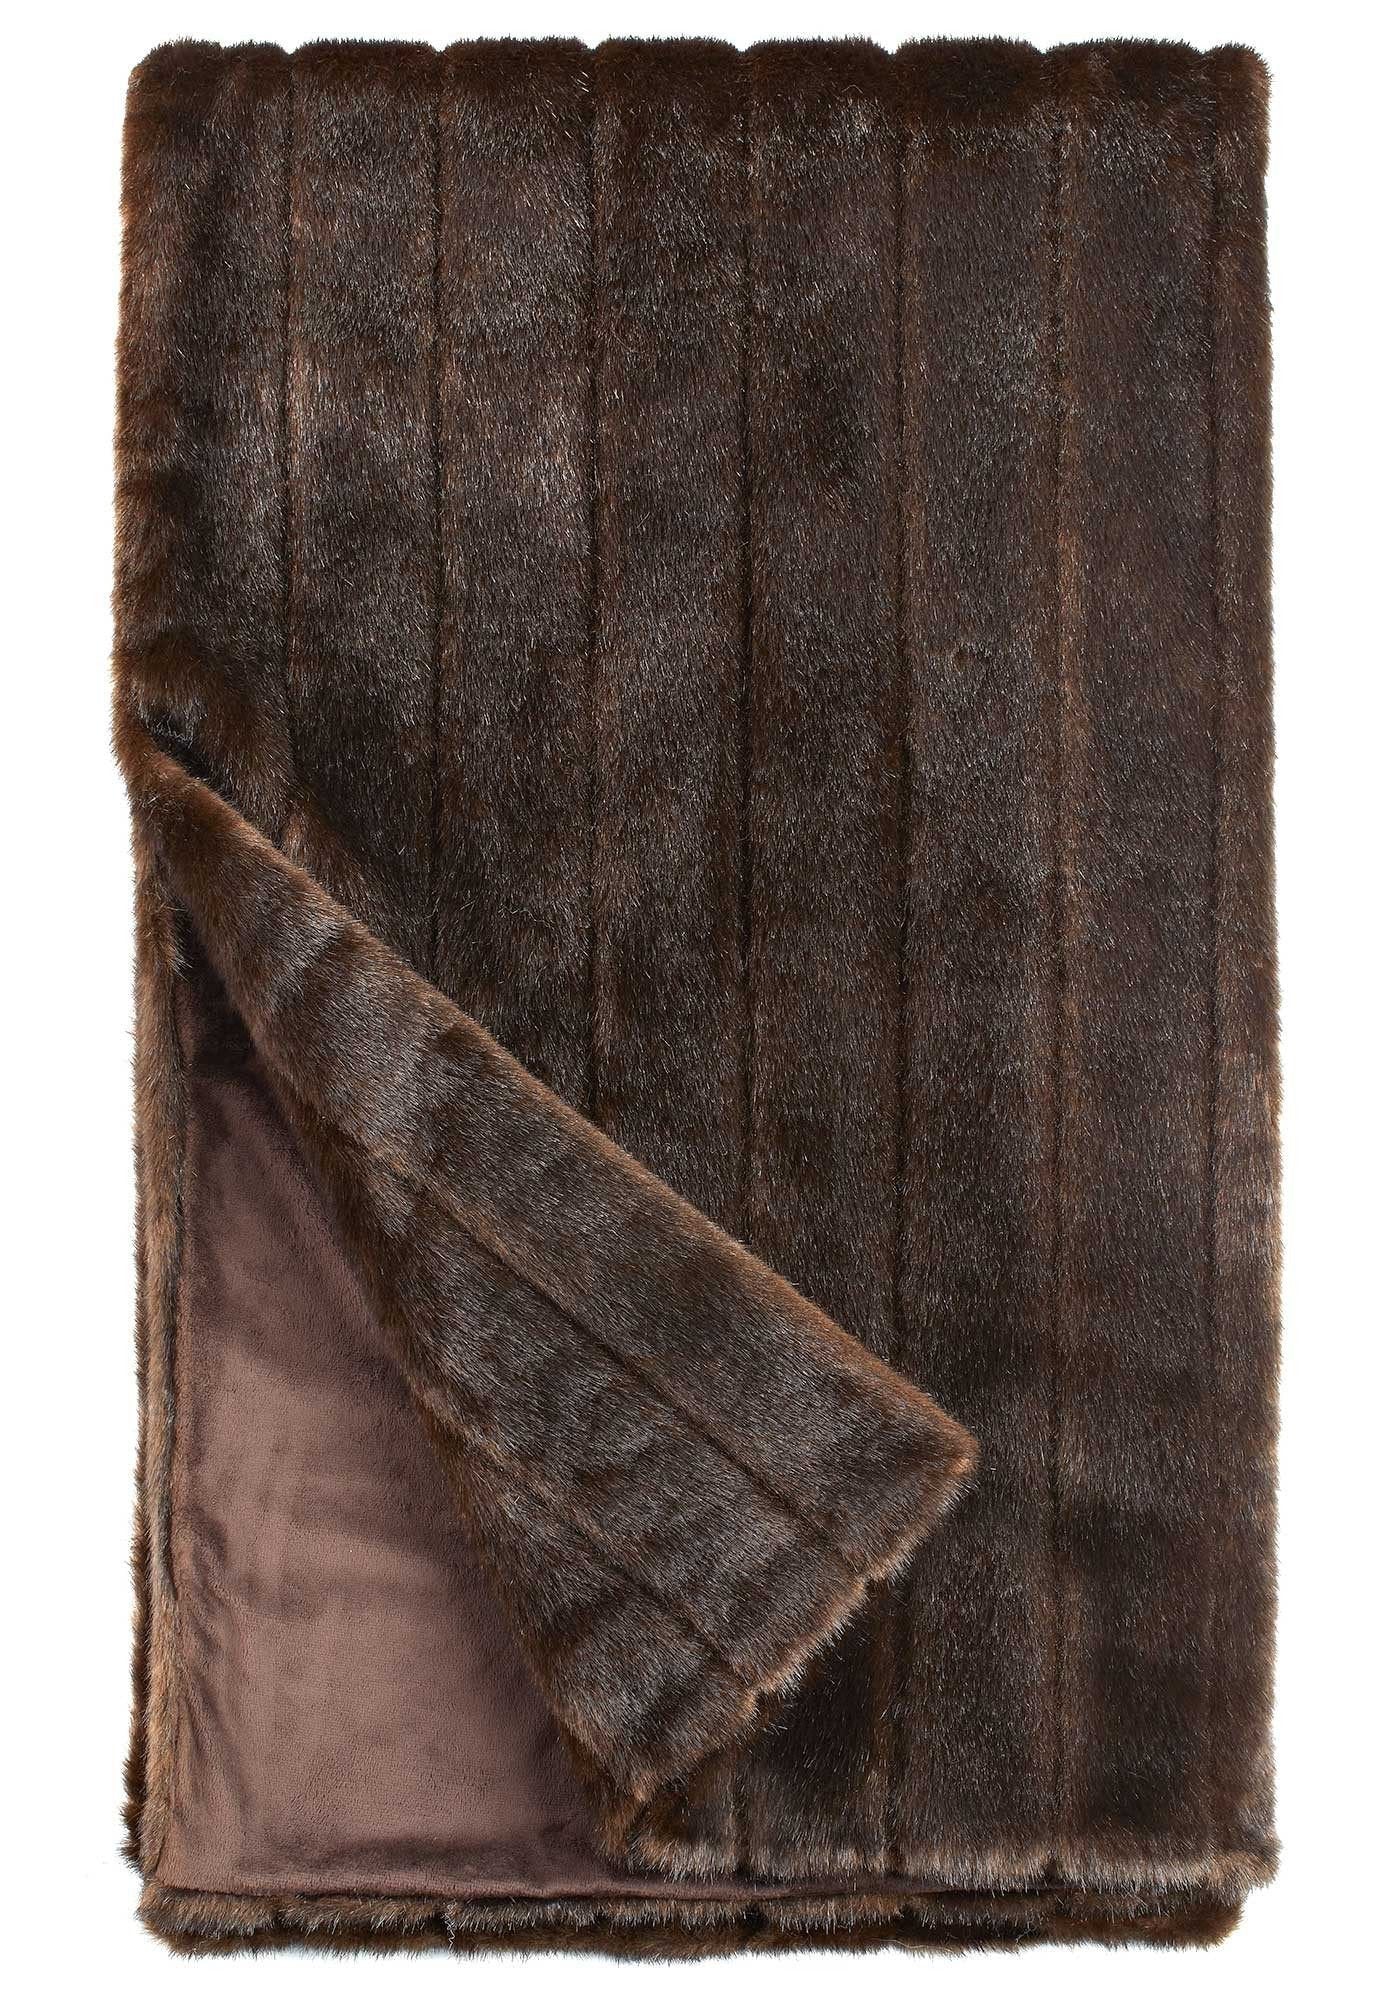 Sable Signature Series Faux Fur Throw Blanket by Fabulous Furs